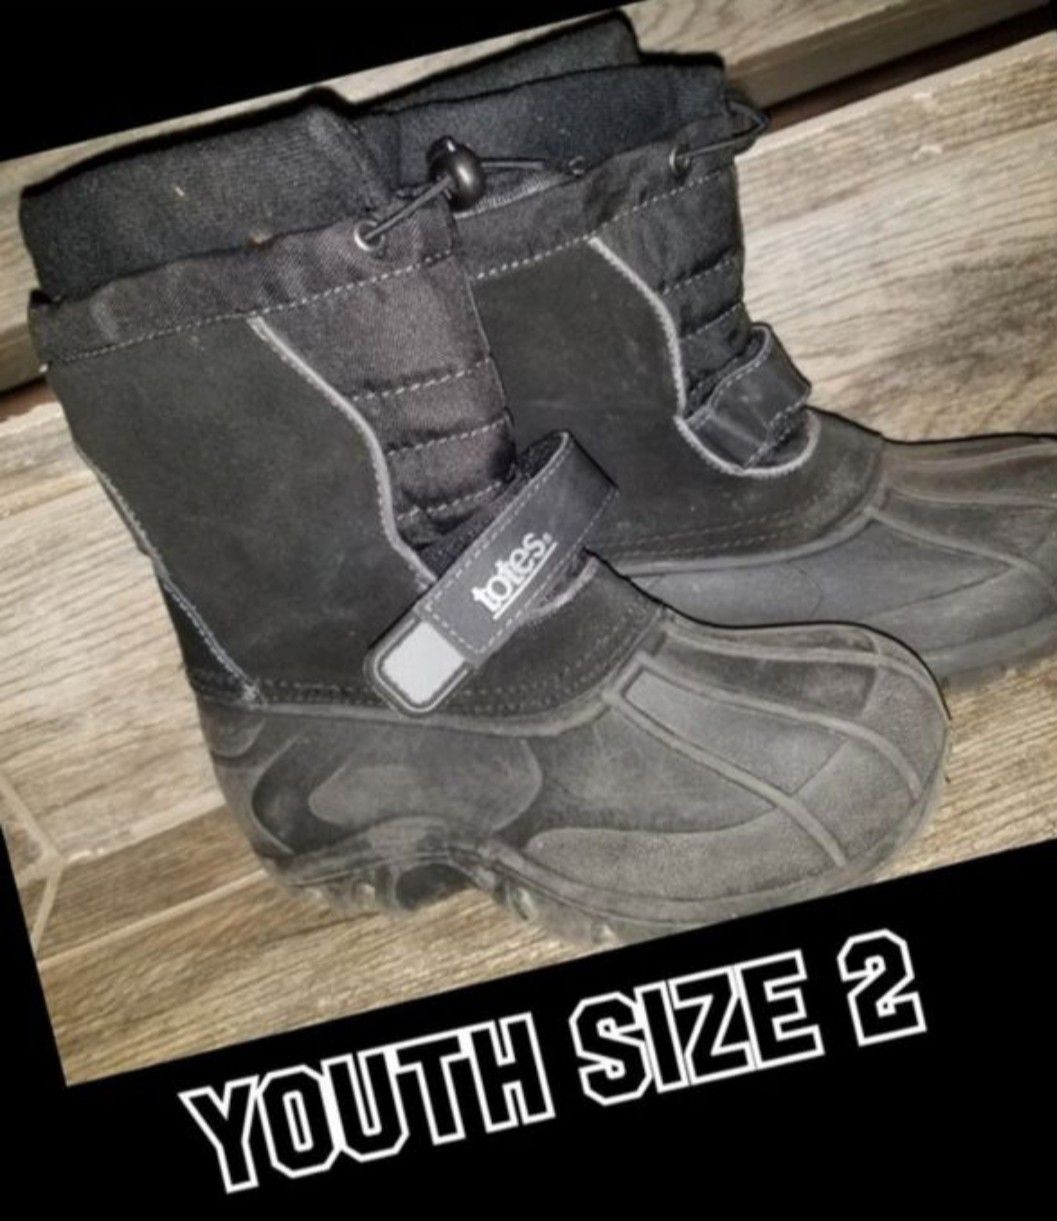 Snow boots youth size 2